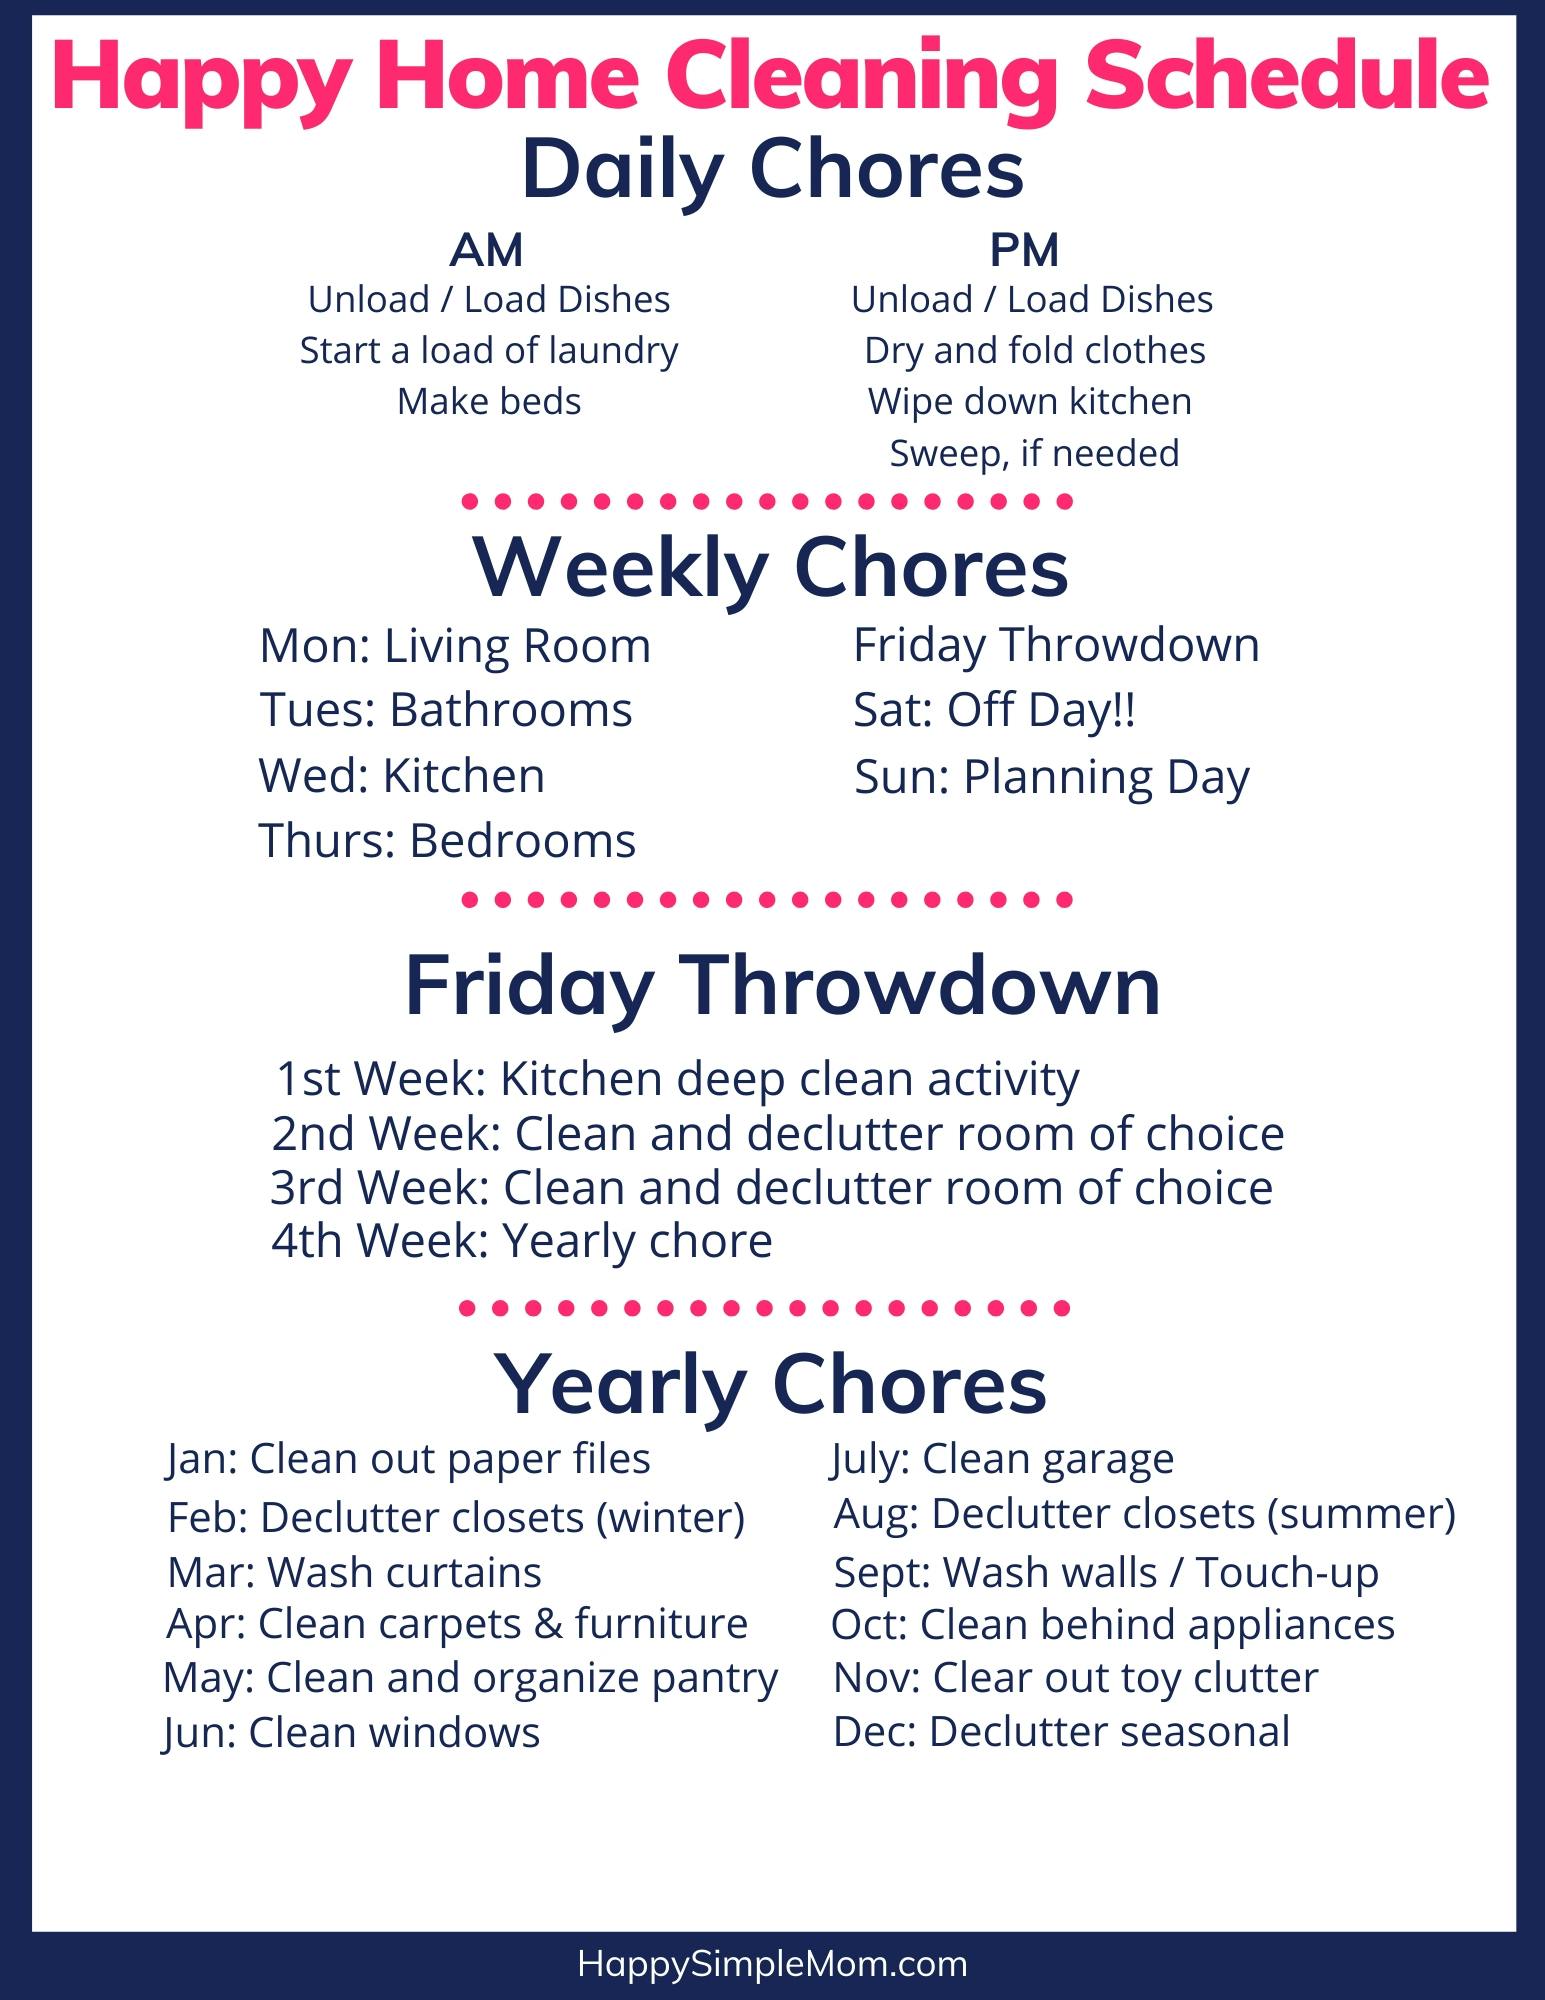 CLEAN MAMA - HOW I ADD THE ROTATING TASKS AND MONTHLY